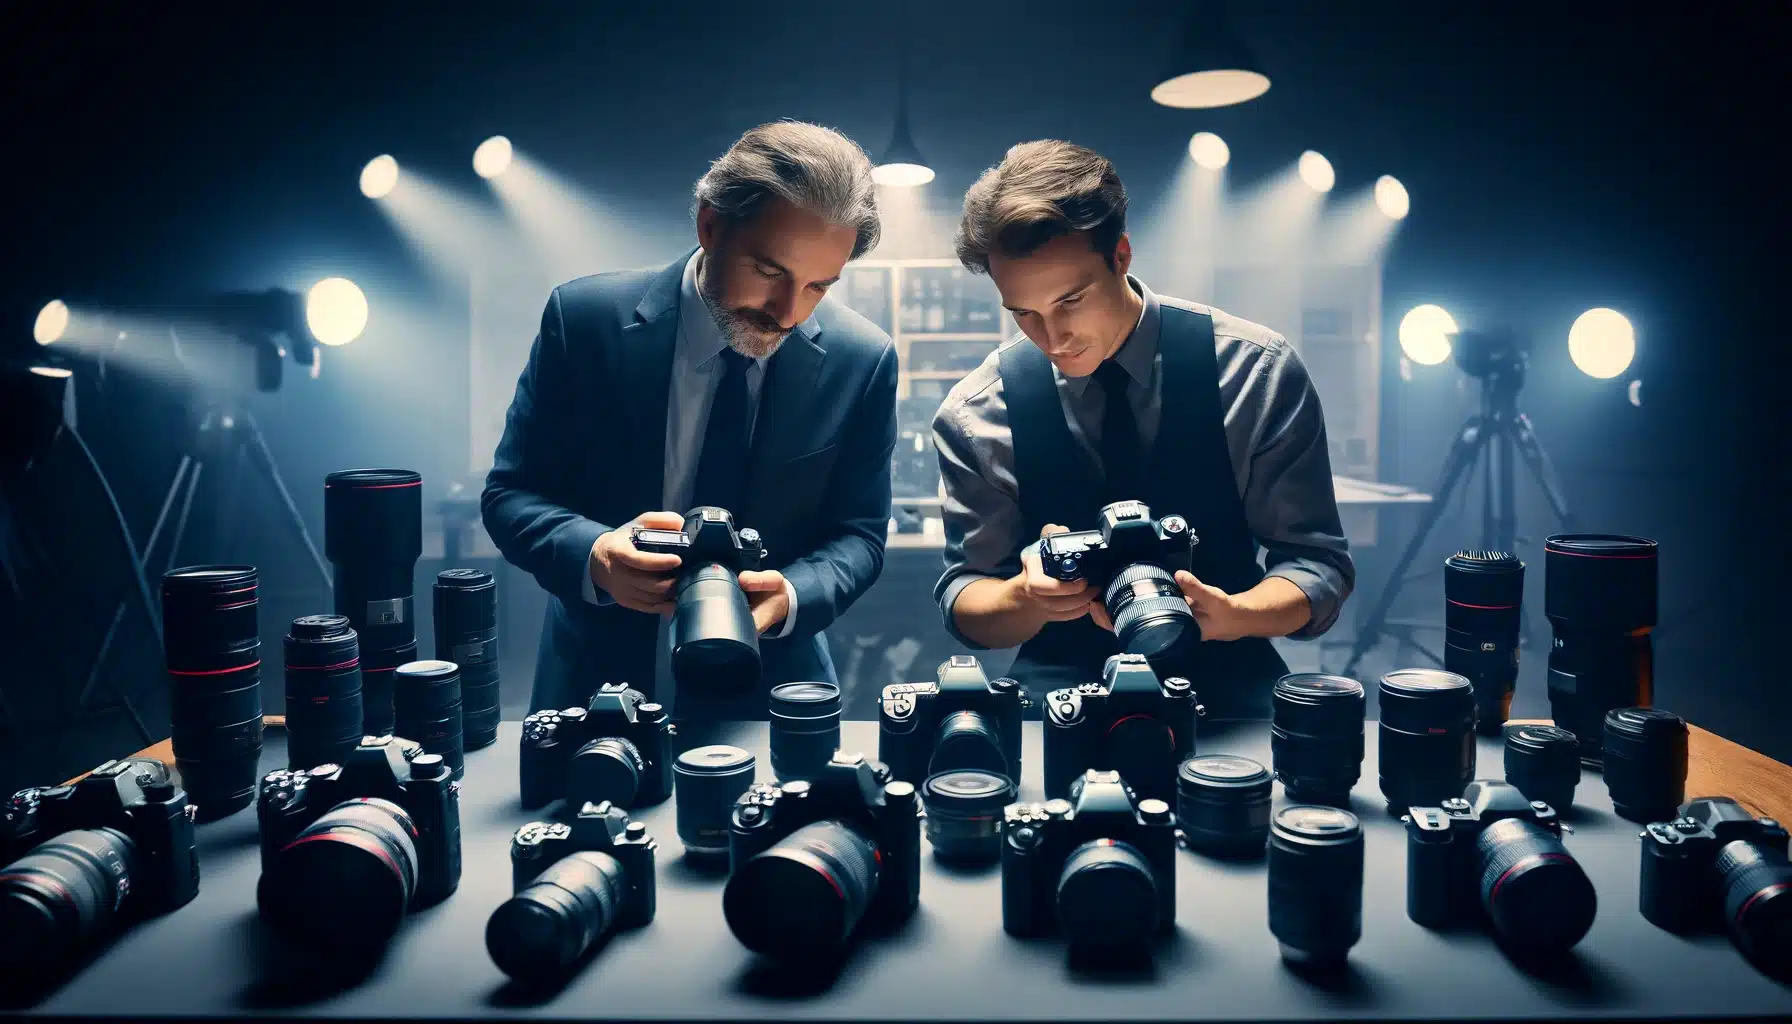 Two photographers evaluating their Camcorders, surrounded by a variety of professional photography equipment in a studio setting.